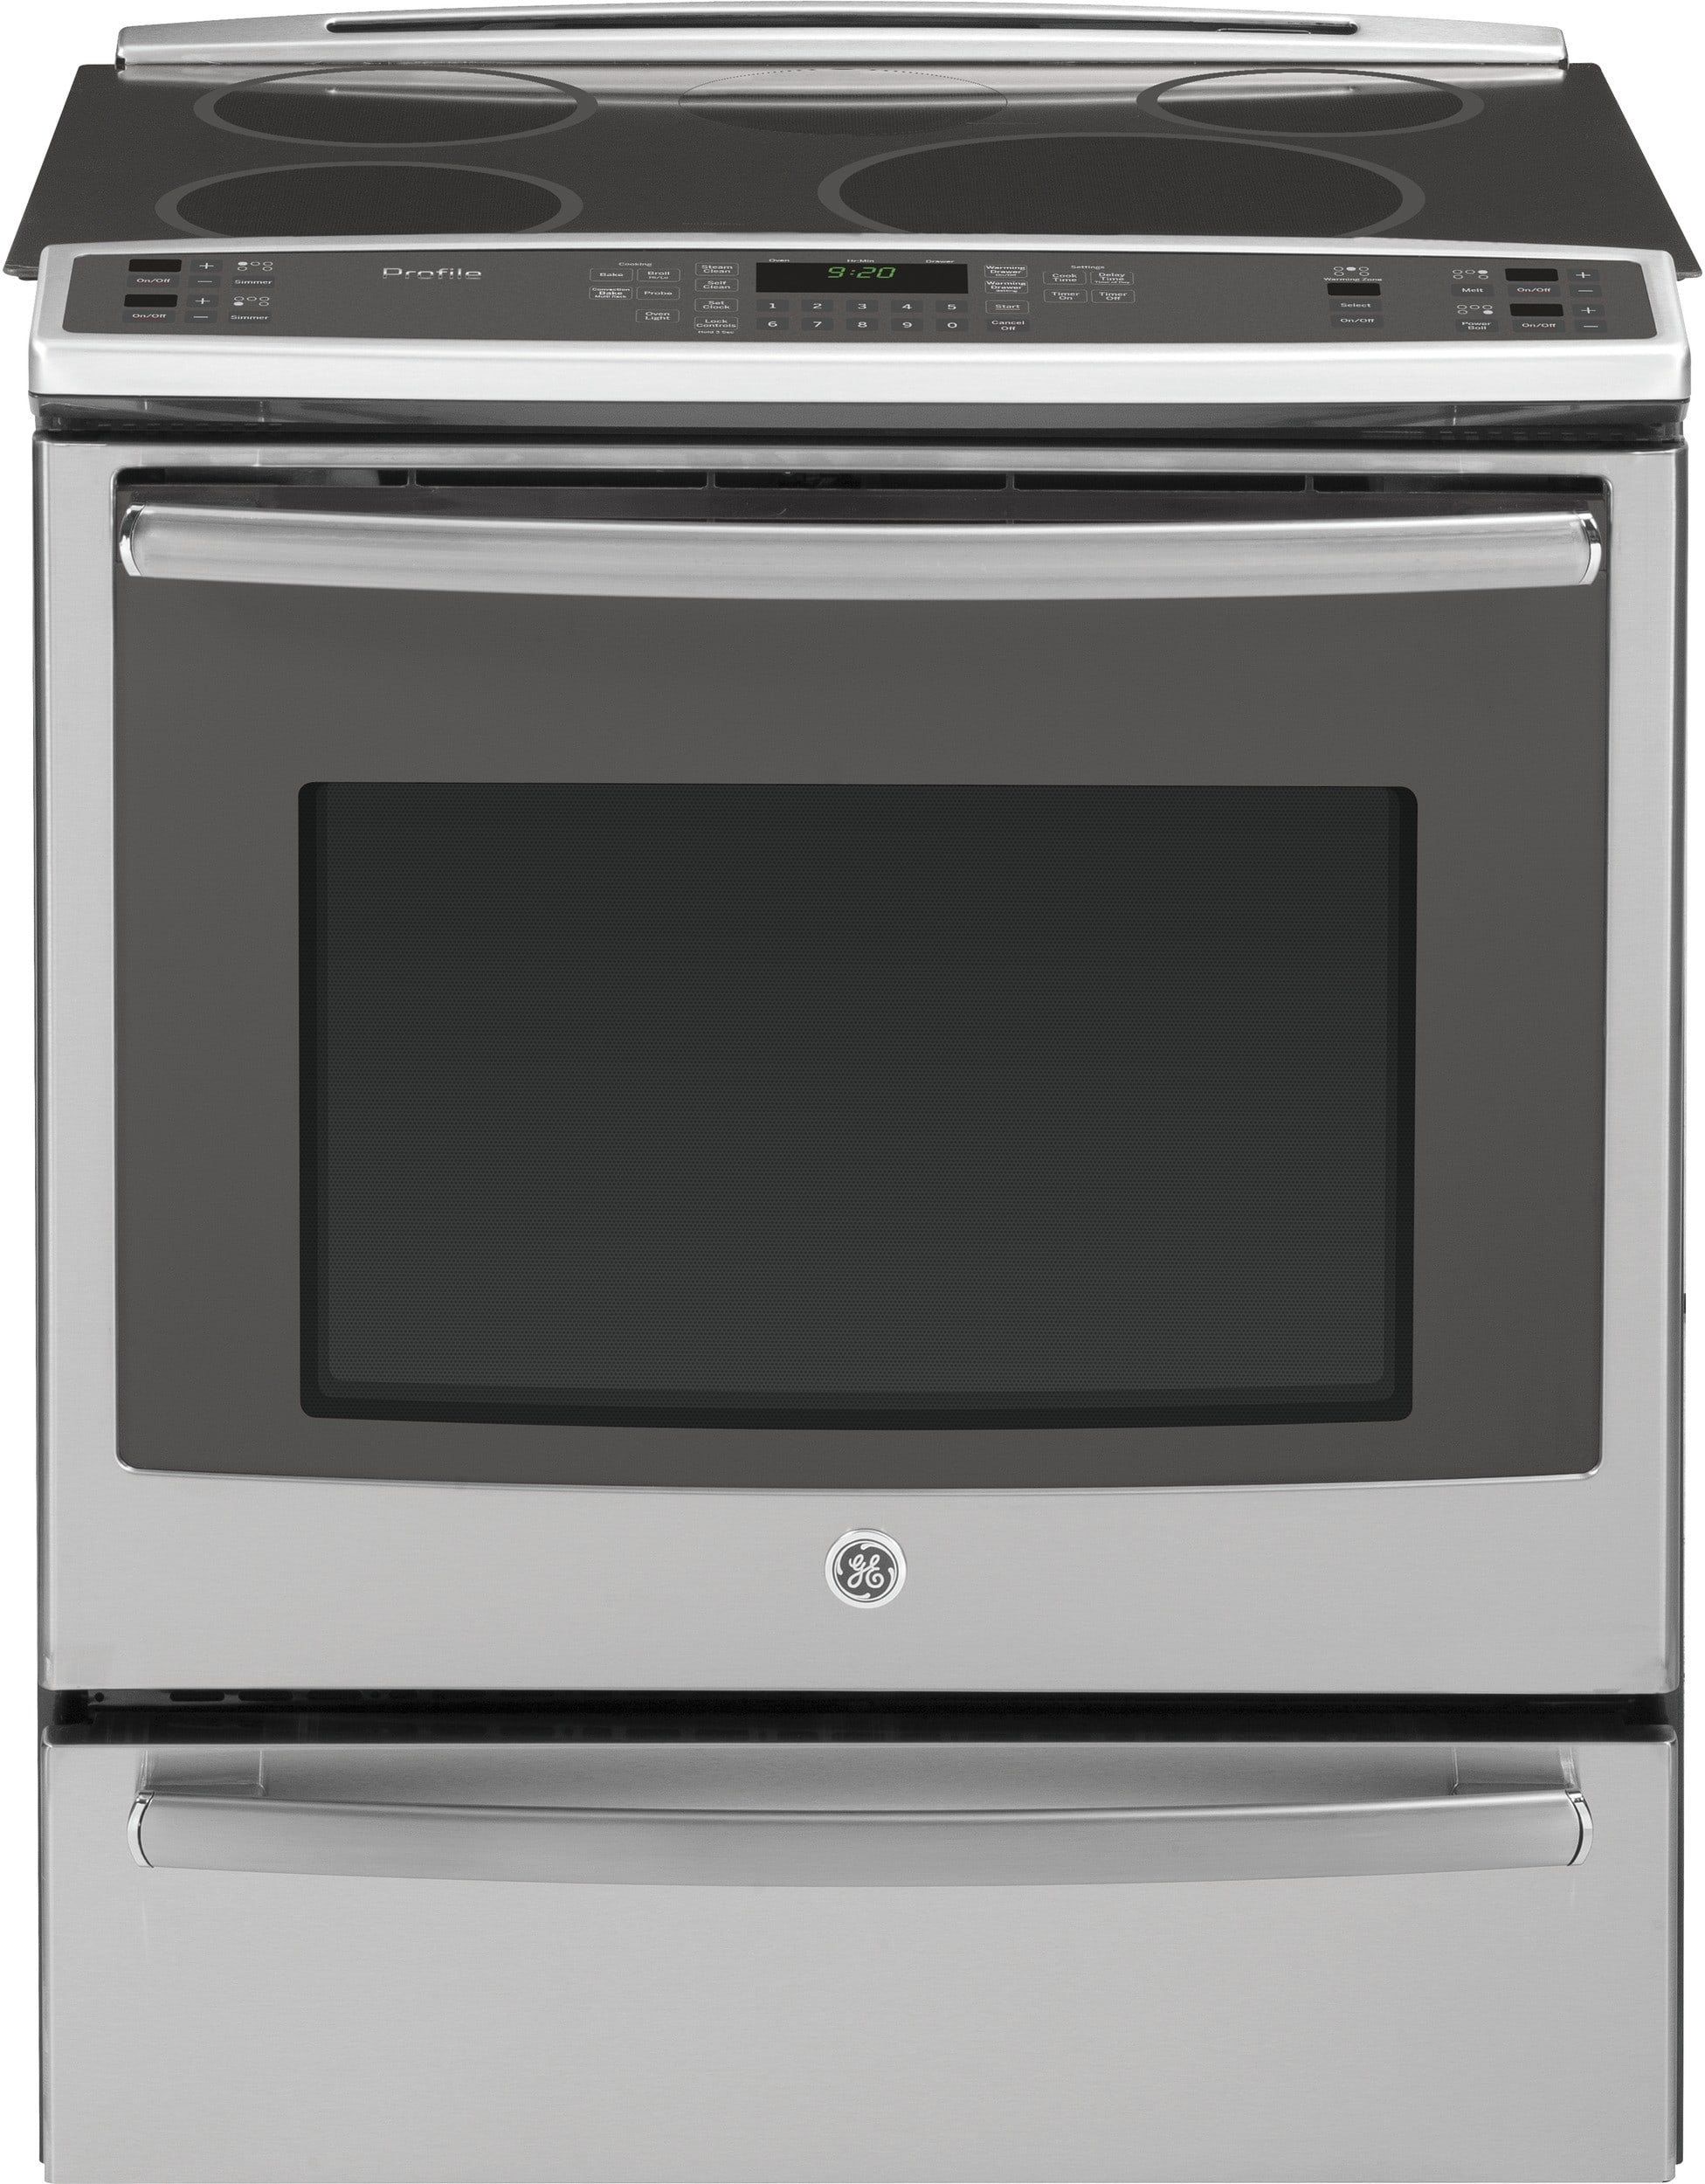 ge-phs920sfss-30-inch-slide-in-induction-range-with-true-convection